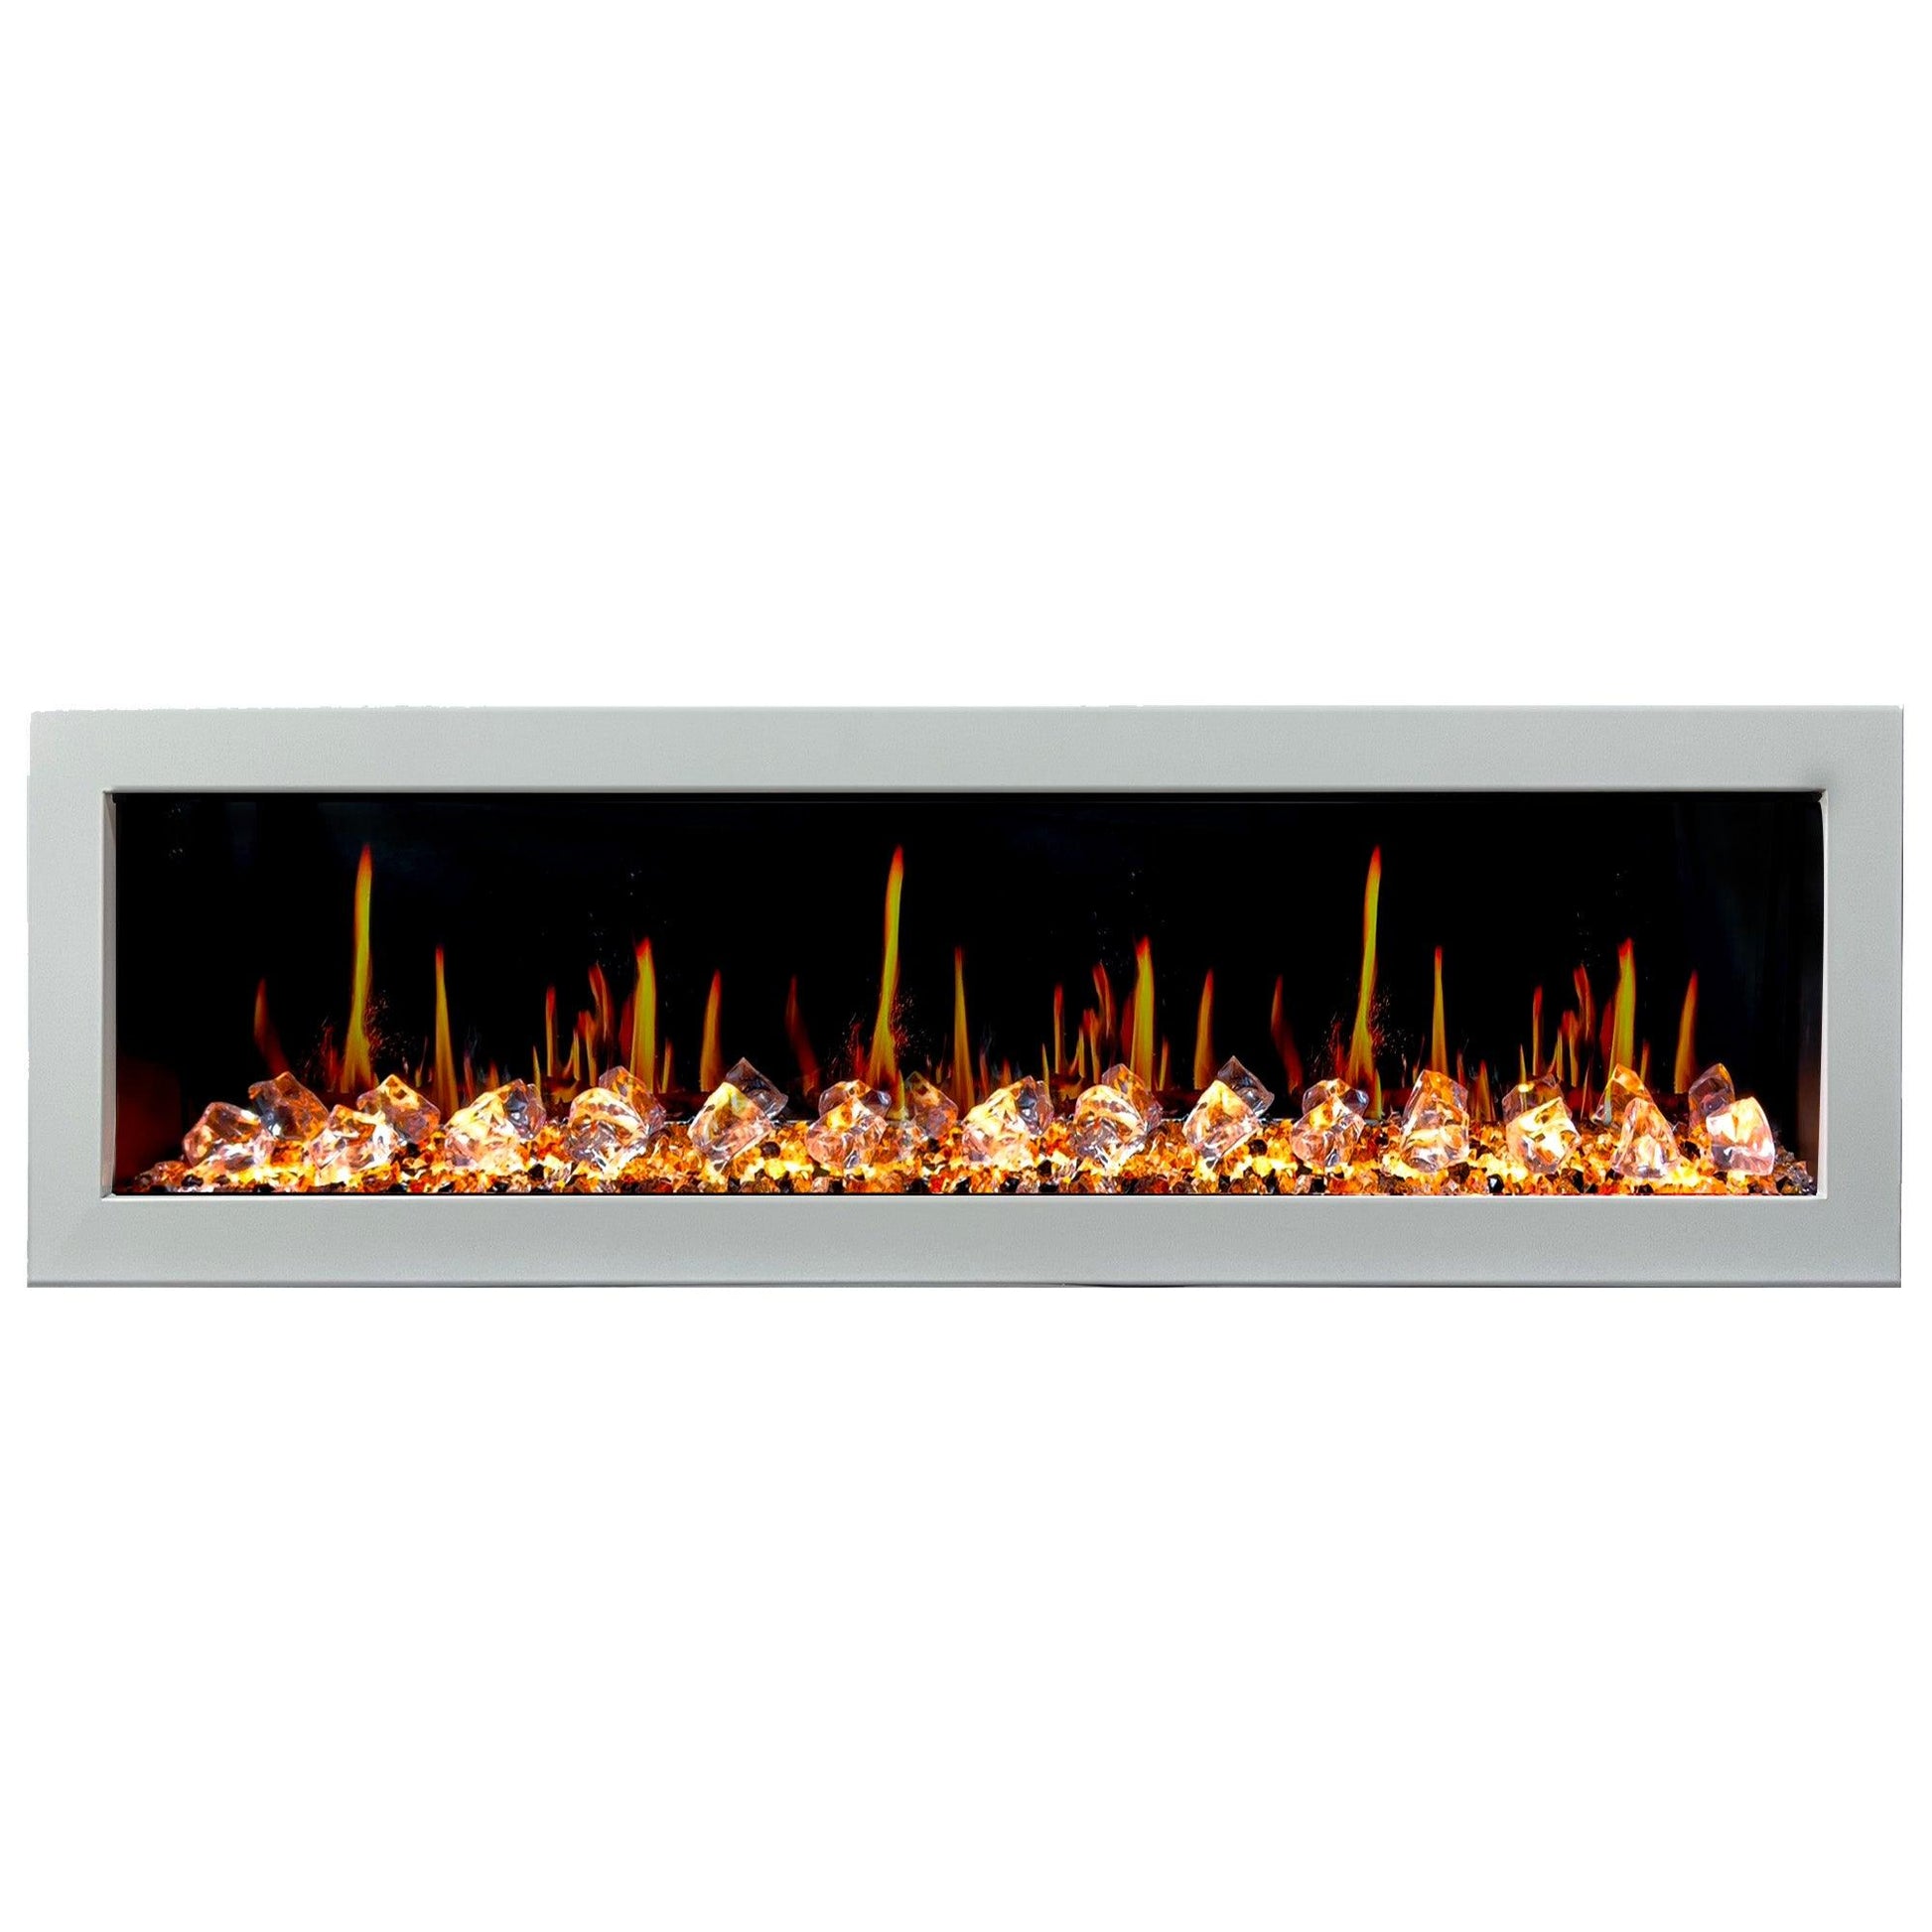 ZopaFlame™ 67" Linear Wall-mount Electric Fireplace - WC17688X - ZopaFlame Fireplaces